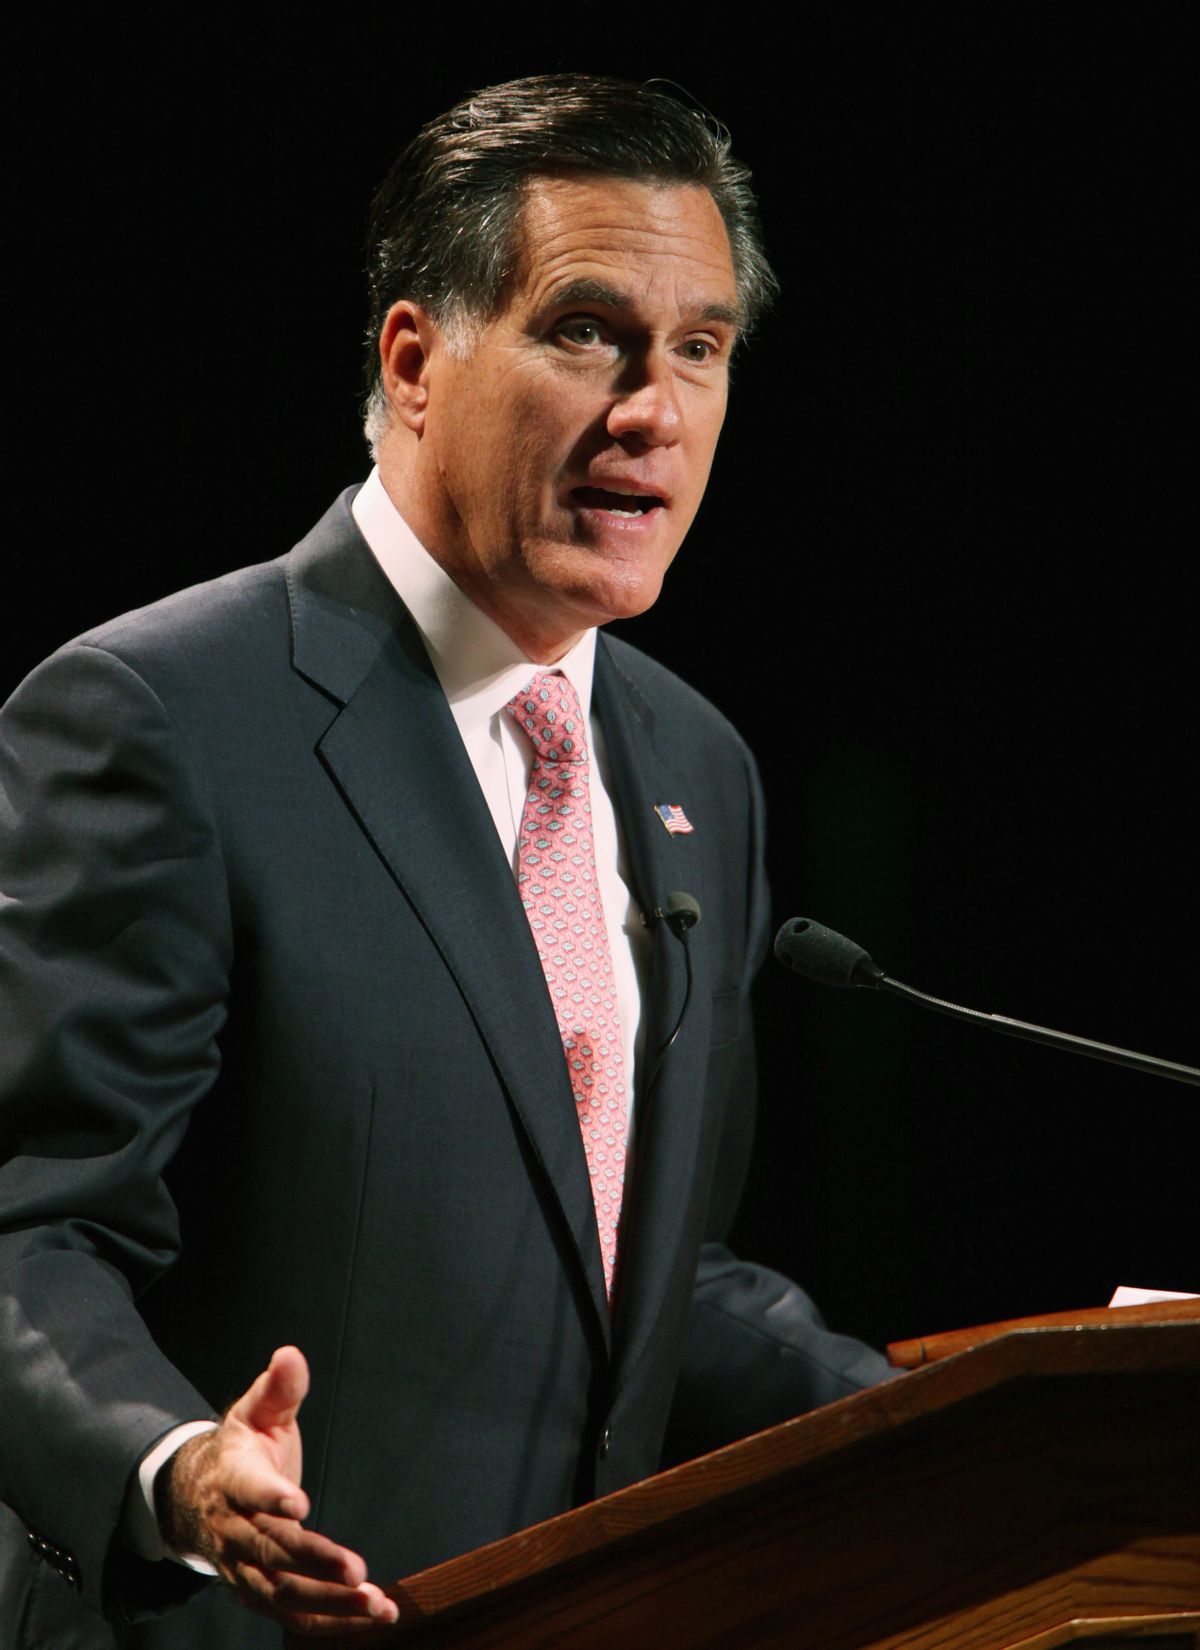 Former Massachusetts Gov. Mitt Romney gives the keynote address at the New Hampshire Republican Party State Convention in Concord, New Hampshire September 25, 2010. REUTERS/Joel Page  (UNITED STATES - Tags: POLITICS) (Reuters)